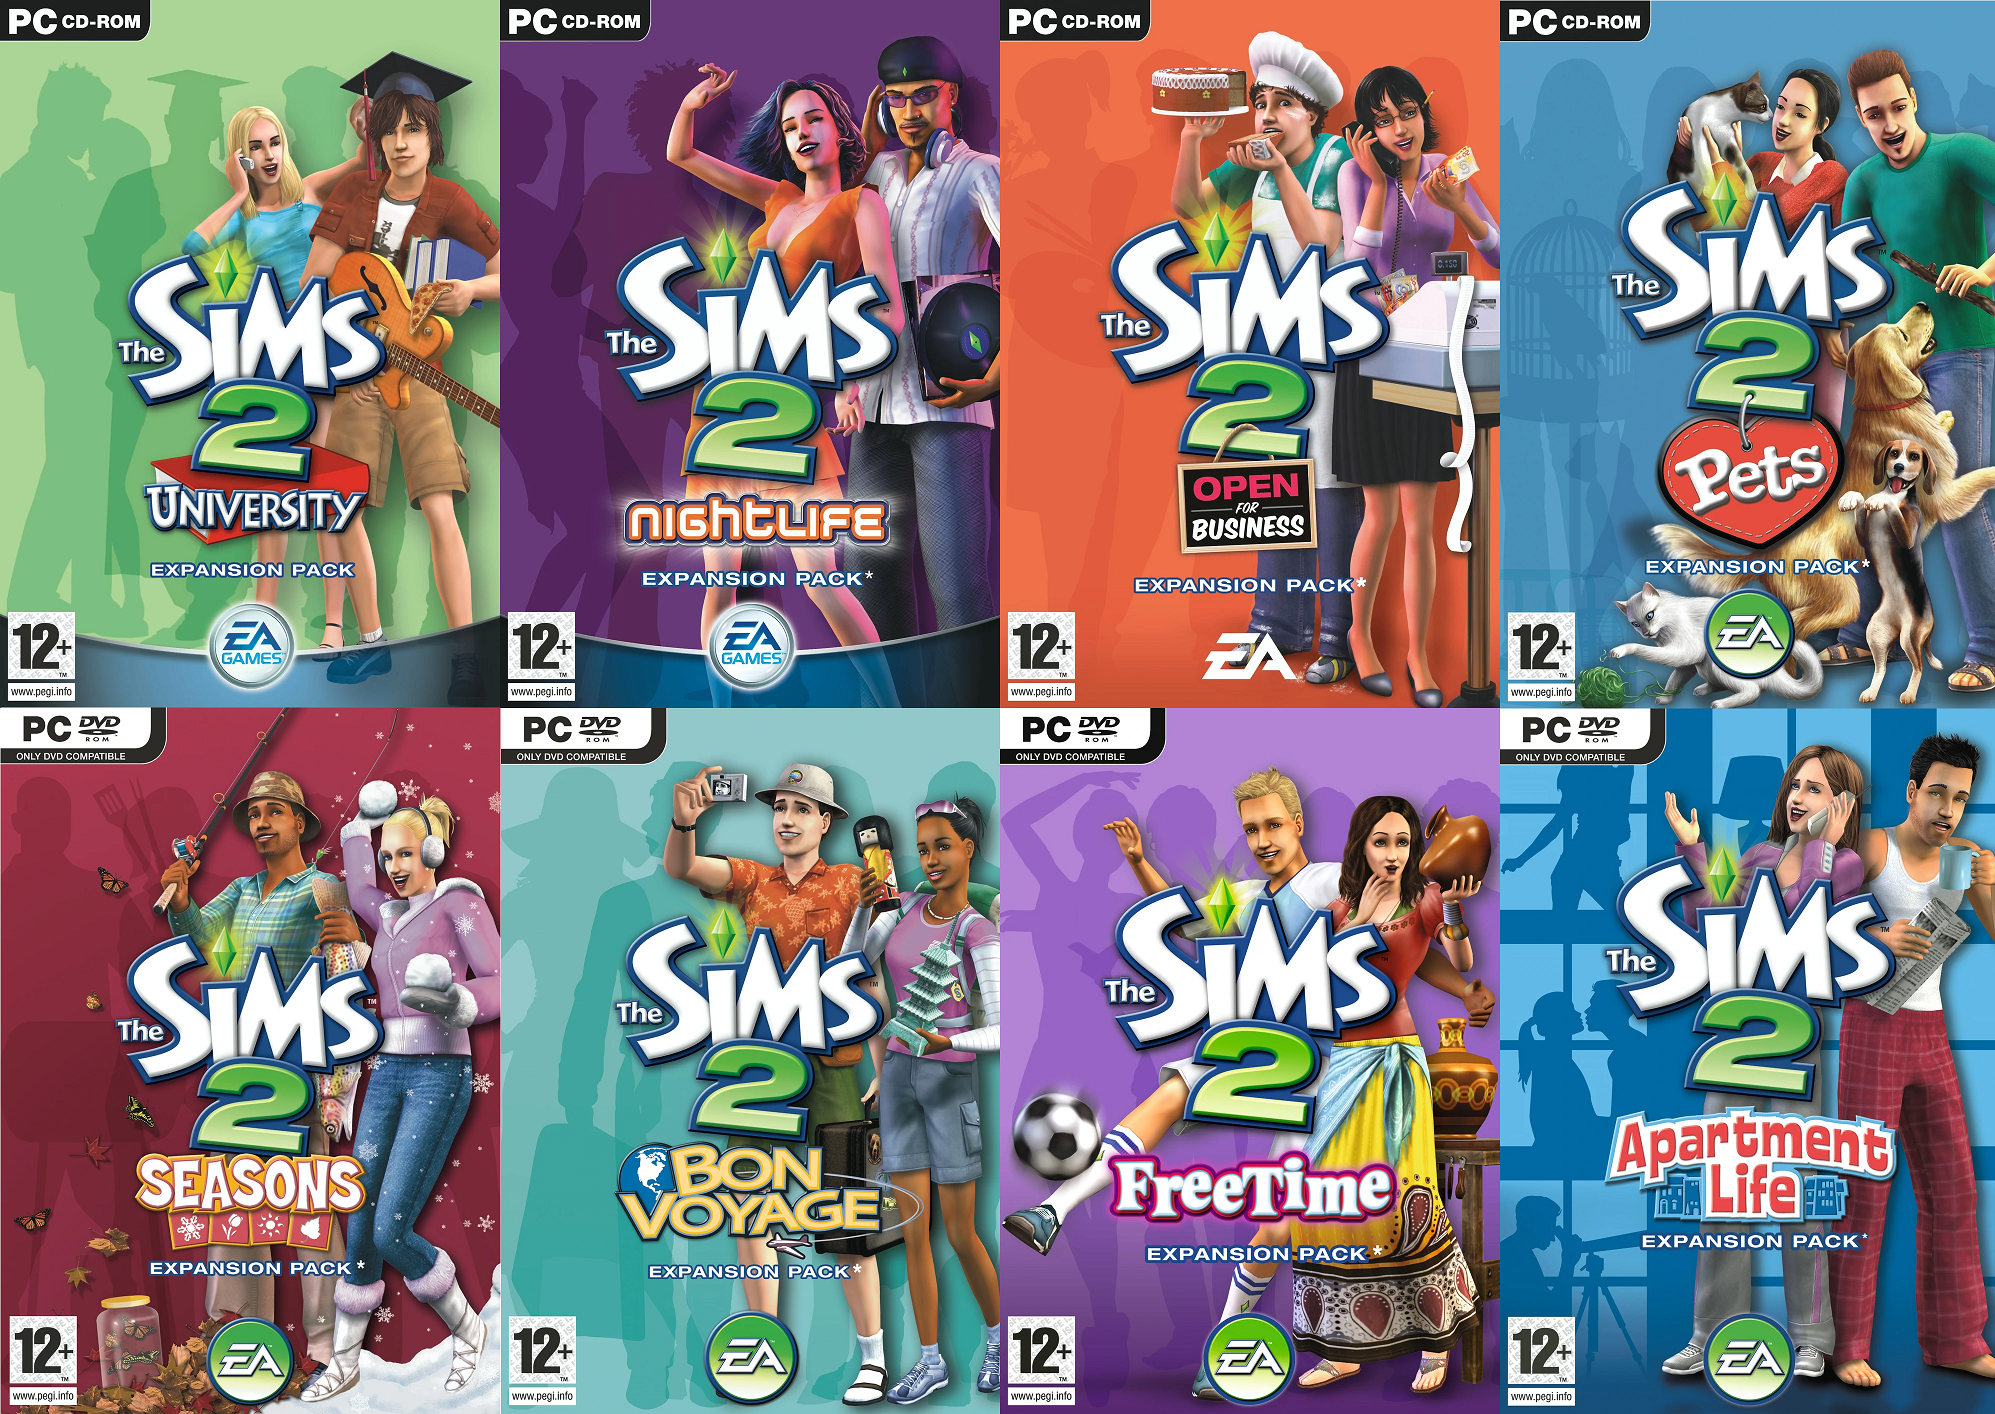 sims 3 expansion pack